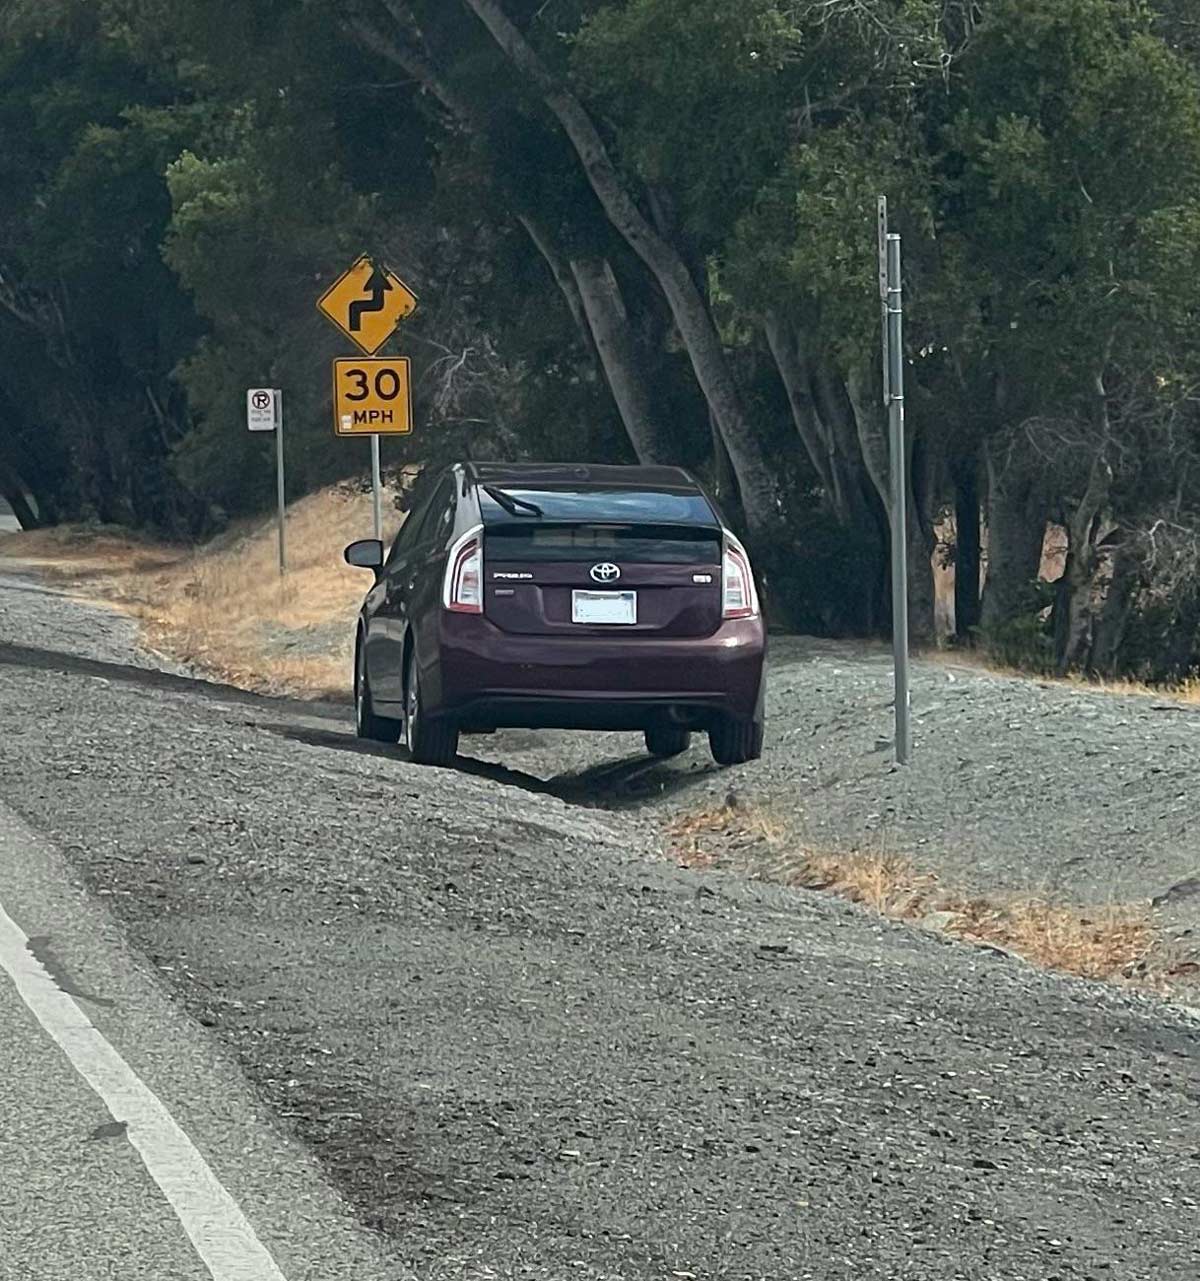 The way this Prius was parked today